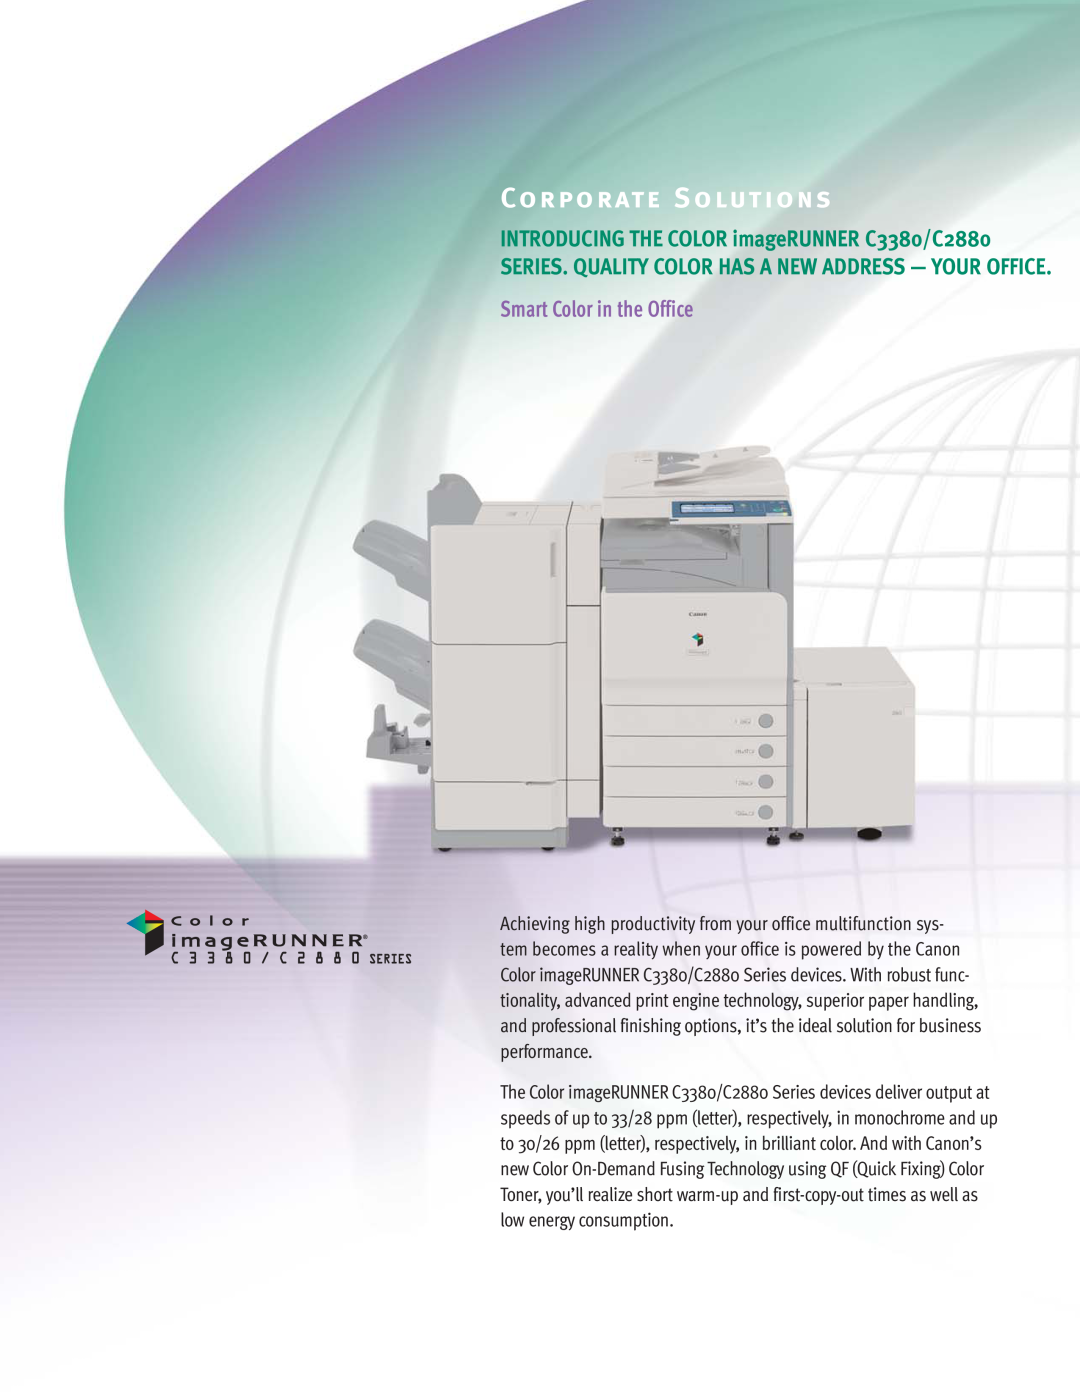 Canon C3380 Series manual Corporate Solutions, Smart Color in the Office, INTRODUCING THE COLOR imageRUNNER C3380/C2880 